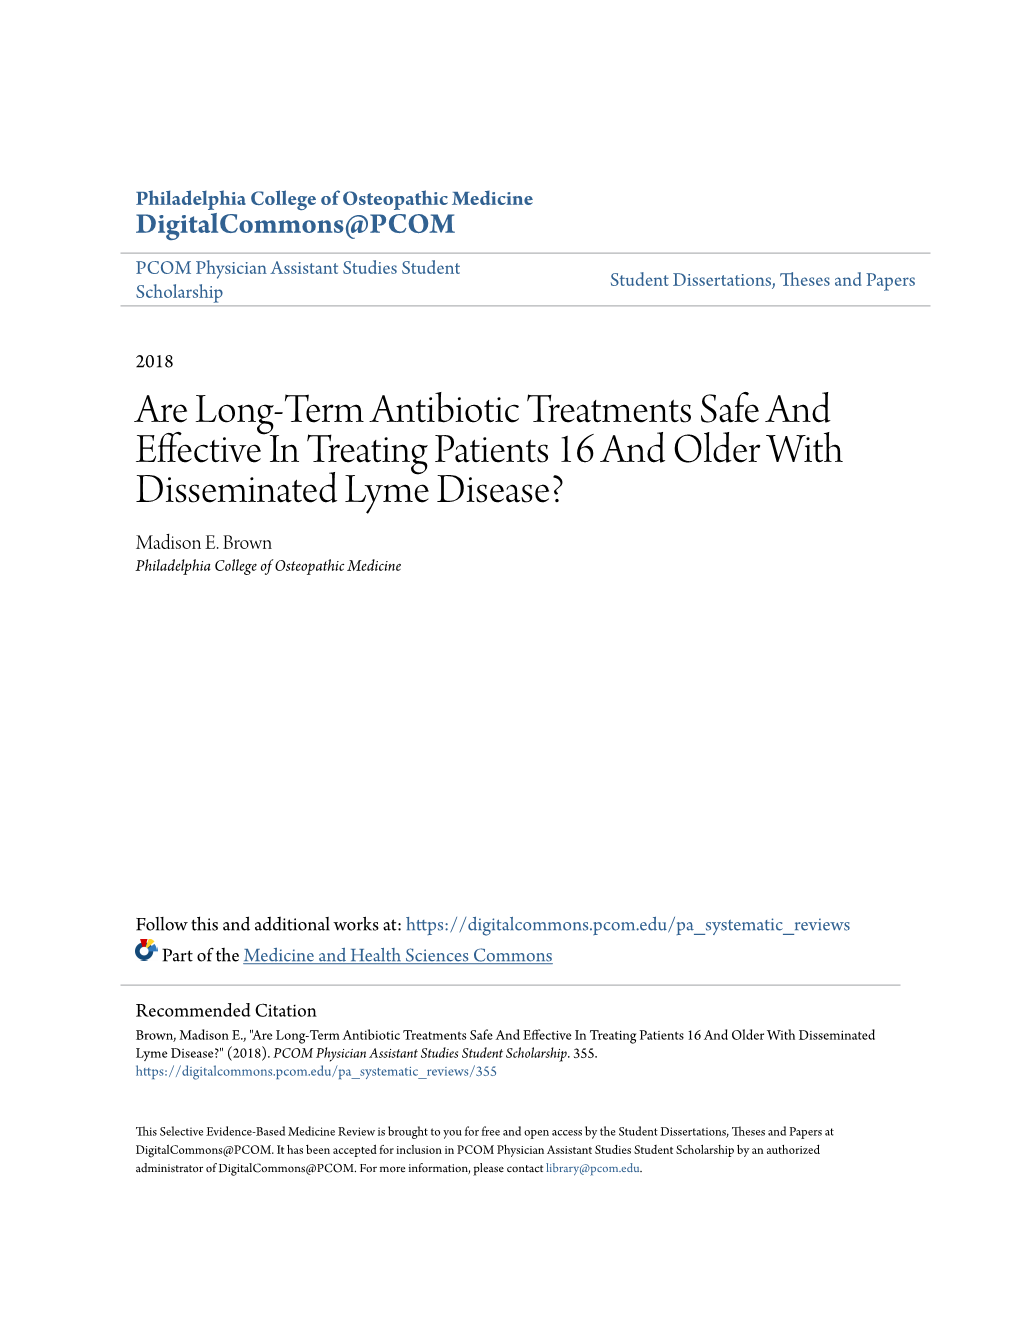 Are Long-Term Antibiotic Treatments Safe and Effective in Treating Patients 16 and Older with Disseminated Lyme Disease? Madison E